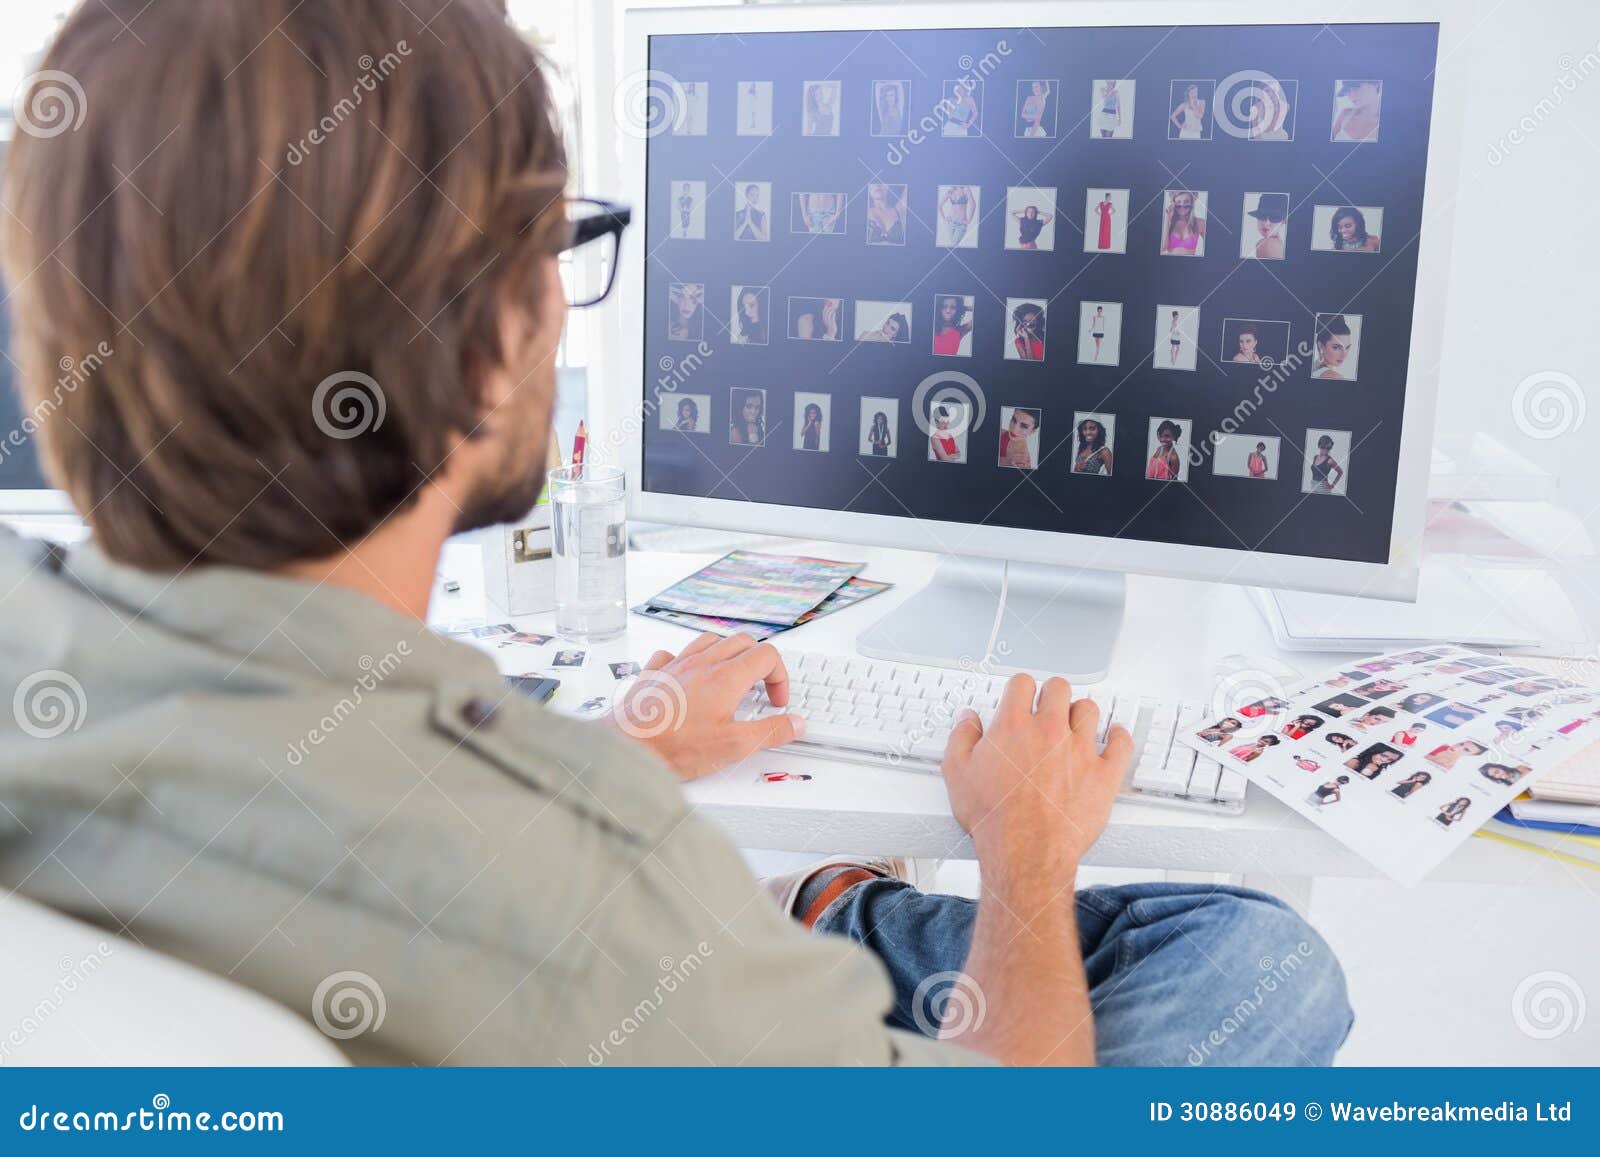 Photo Editor  Viewing Thumbnails On Computer  Stock Image 